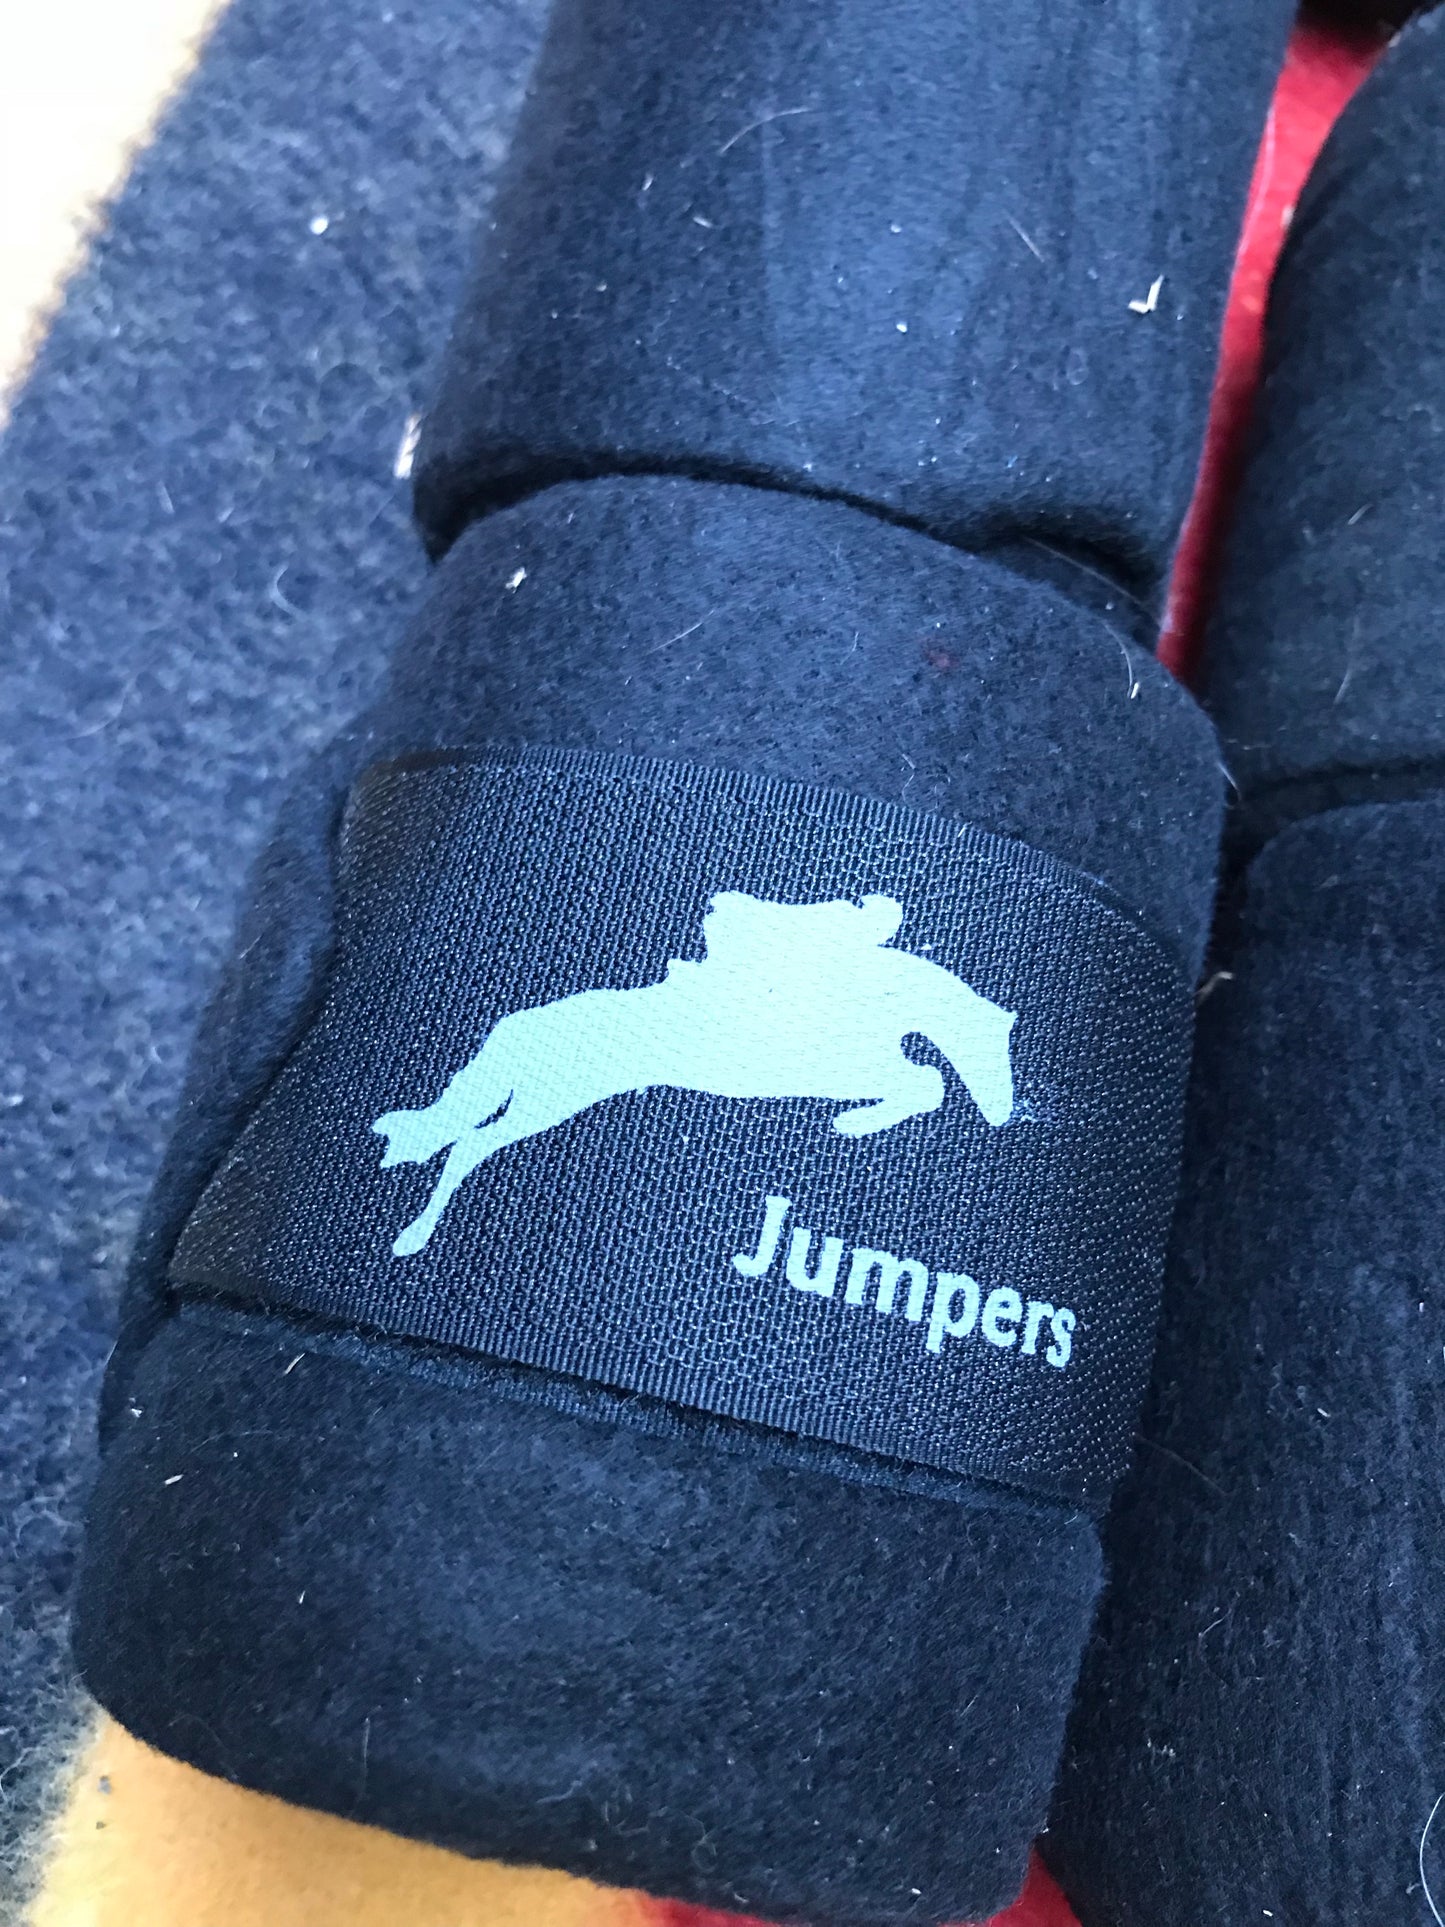 Jumpers horseline black fleece bandages with tail wrap FREE POSTAGE🟢